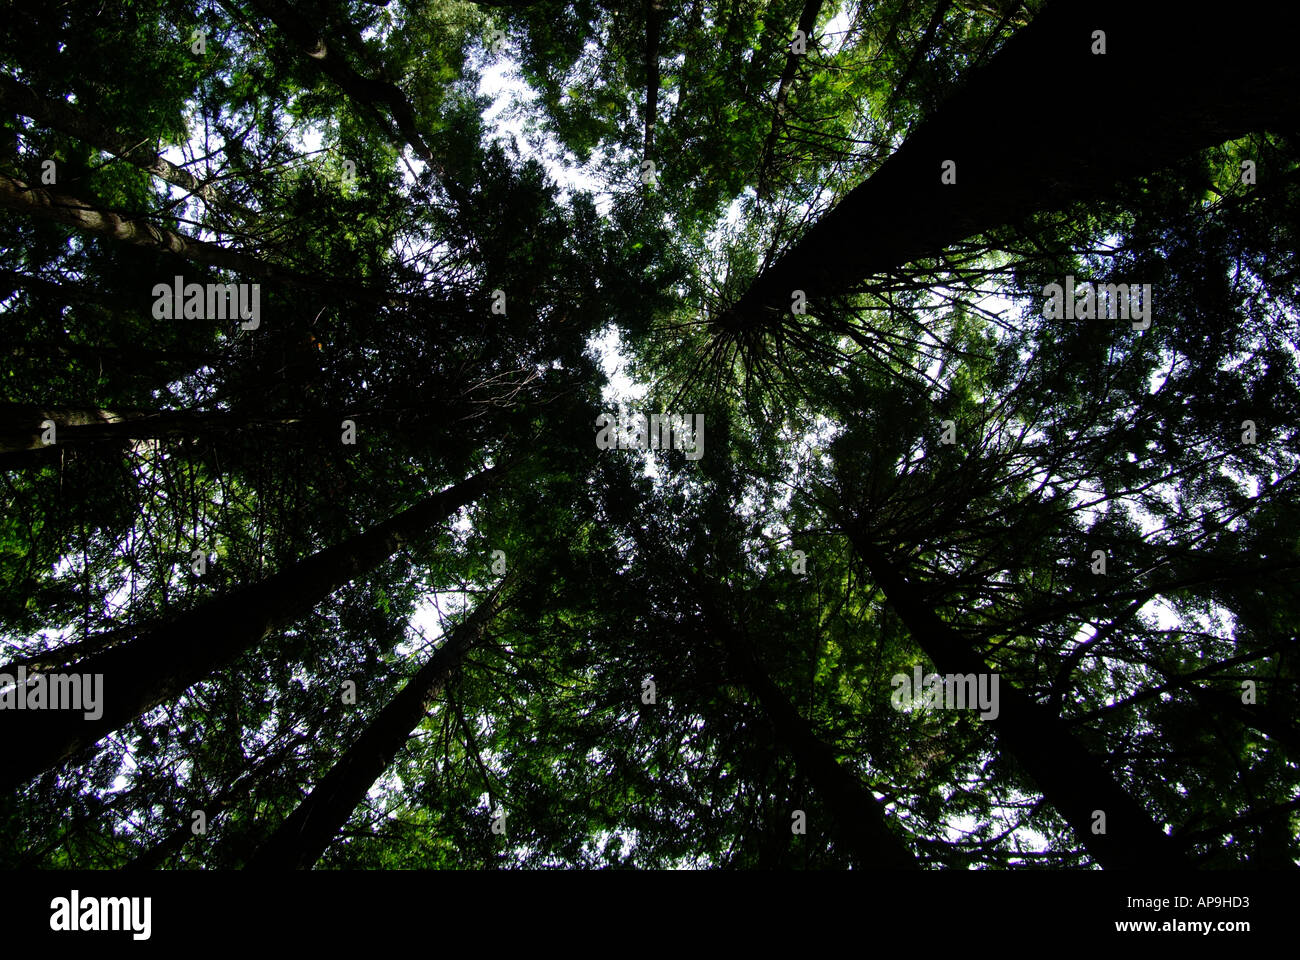 Looking straight up through canopies of forest trees Stock Photo